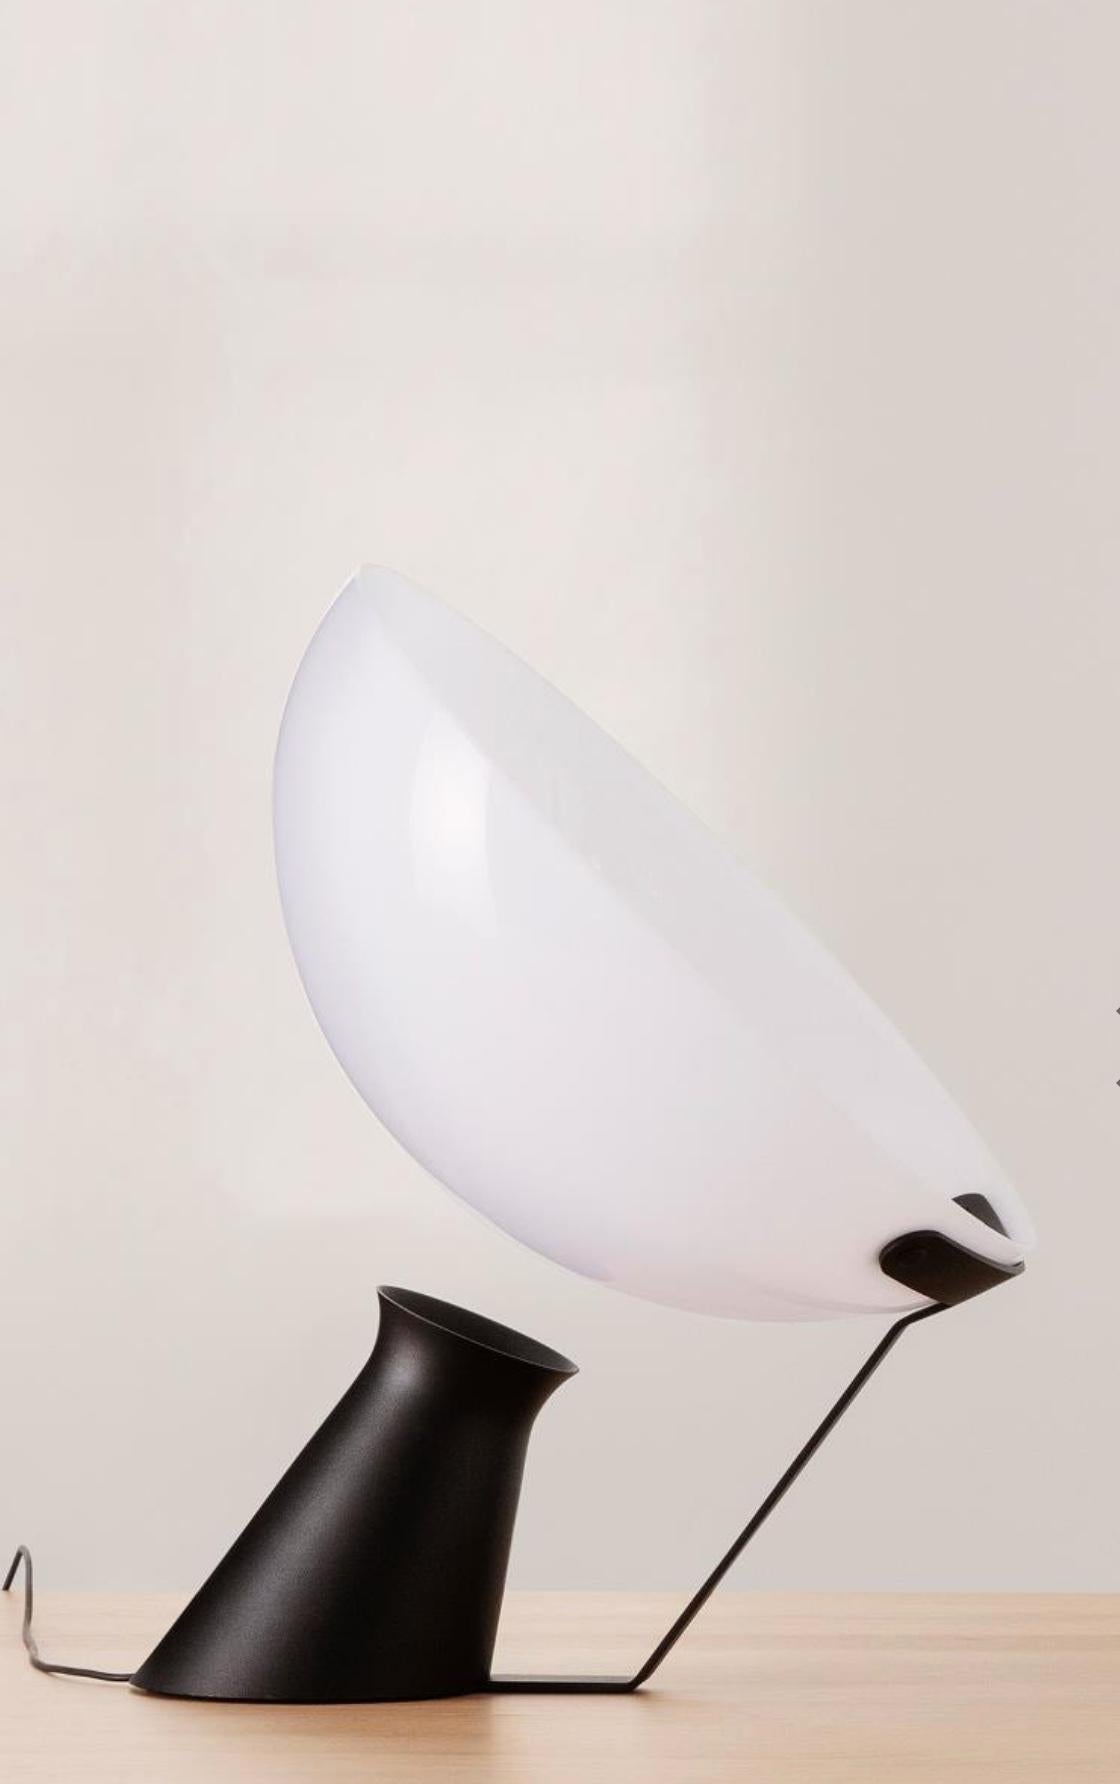 Table lamp designed by Angelo Mangiarotti in 1988. The diameter given applies to the shade. The width of the lamp is 40cm. 

Technical information: 
Voltage: switching 230V/110V power supply 
Light source: 6,1W 757 lm 3.000K LED 
Cord: 2,5m